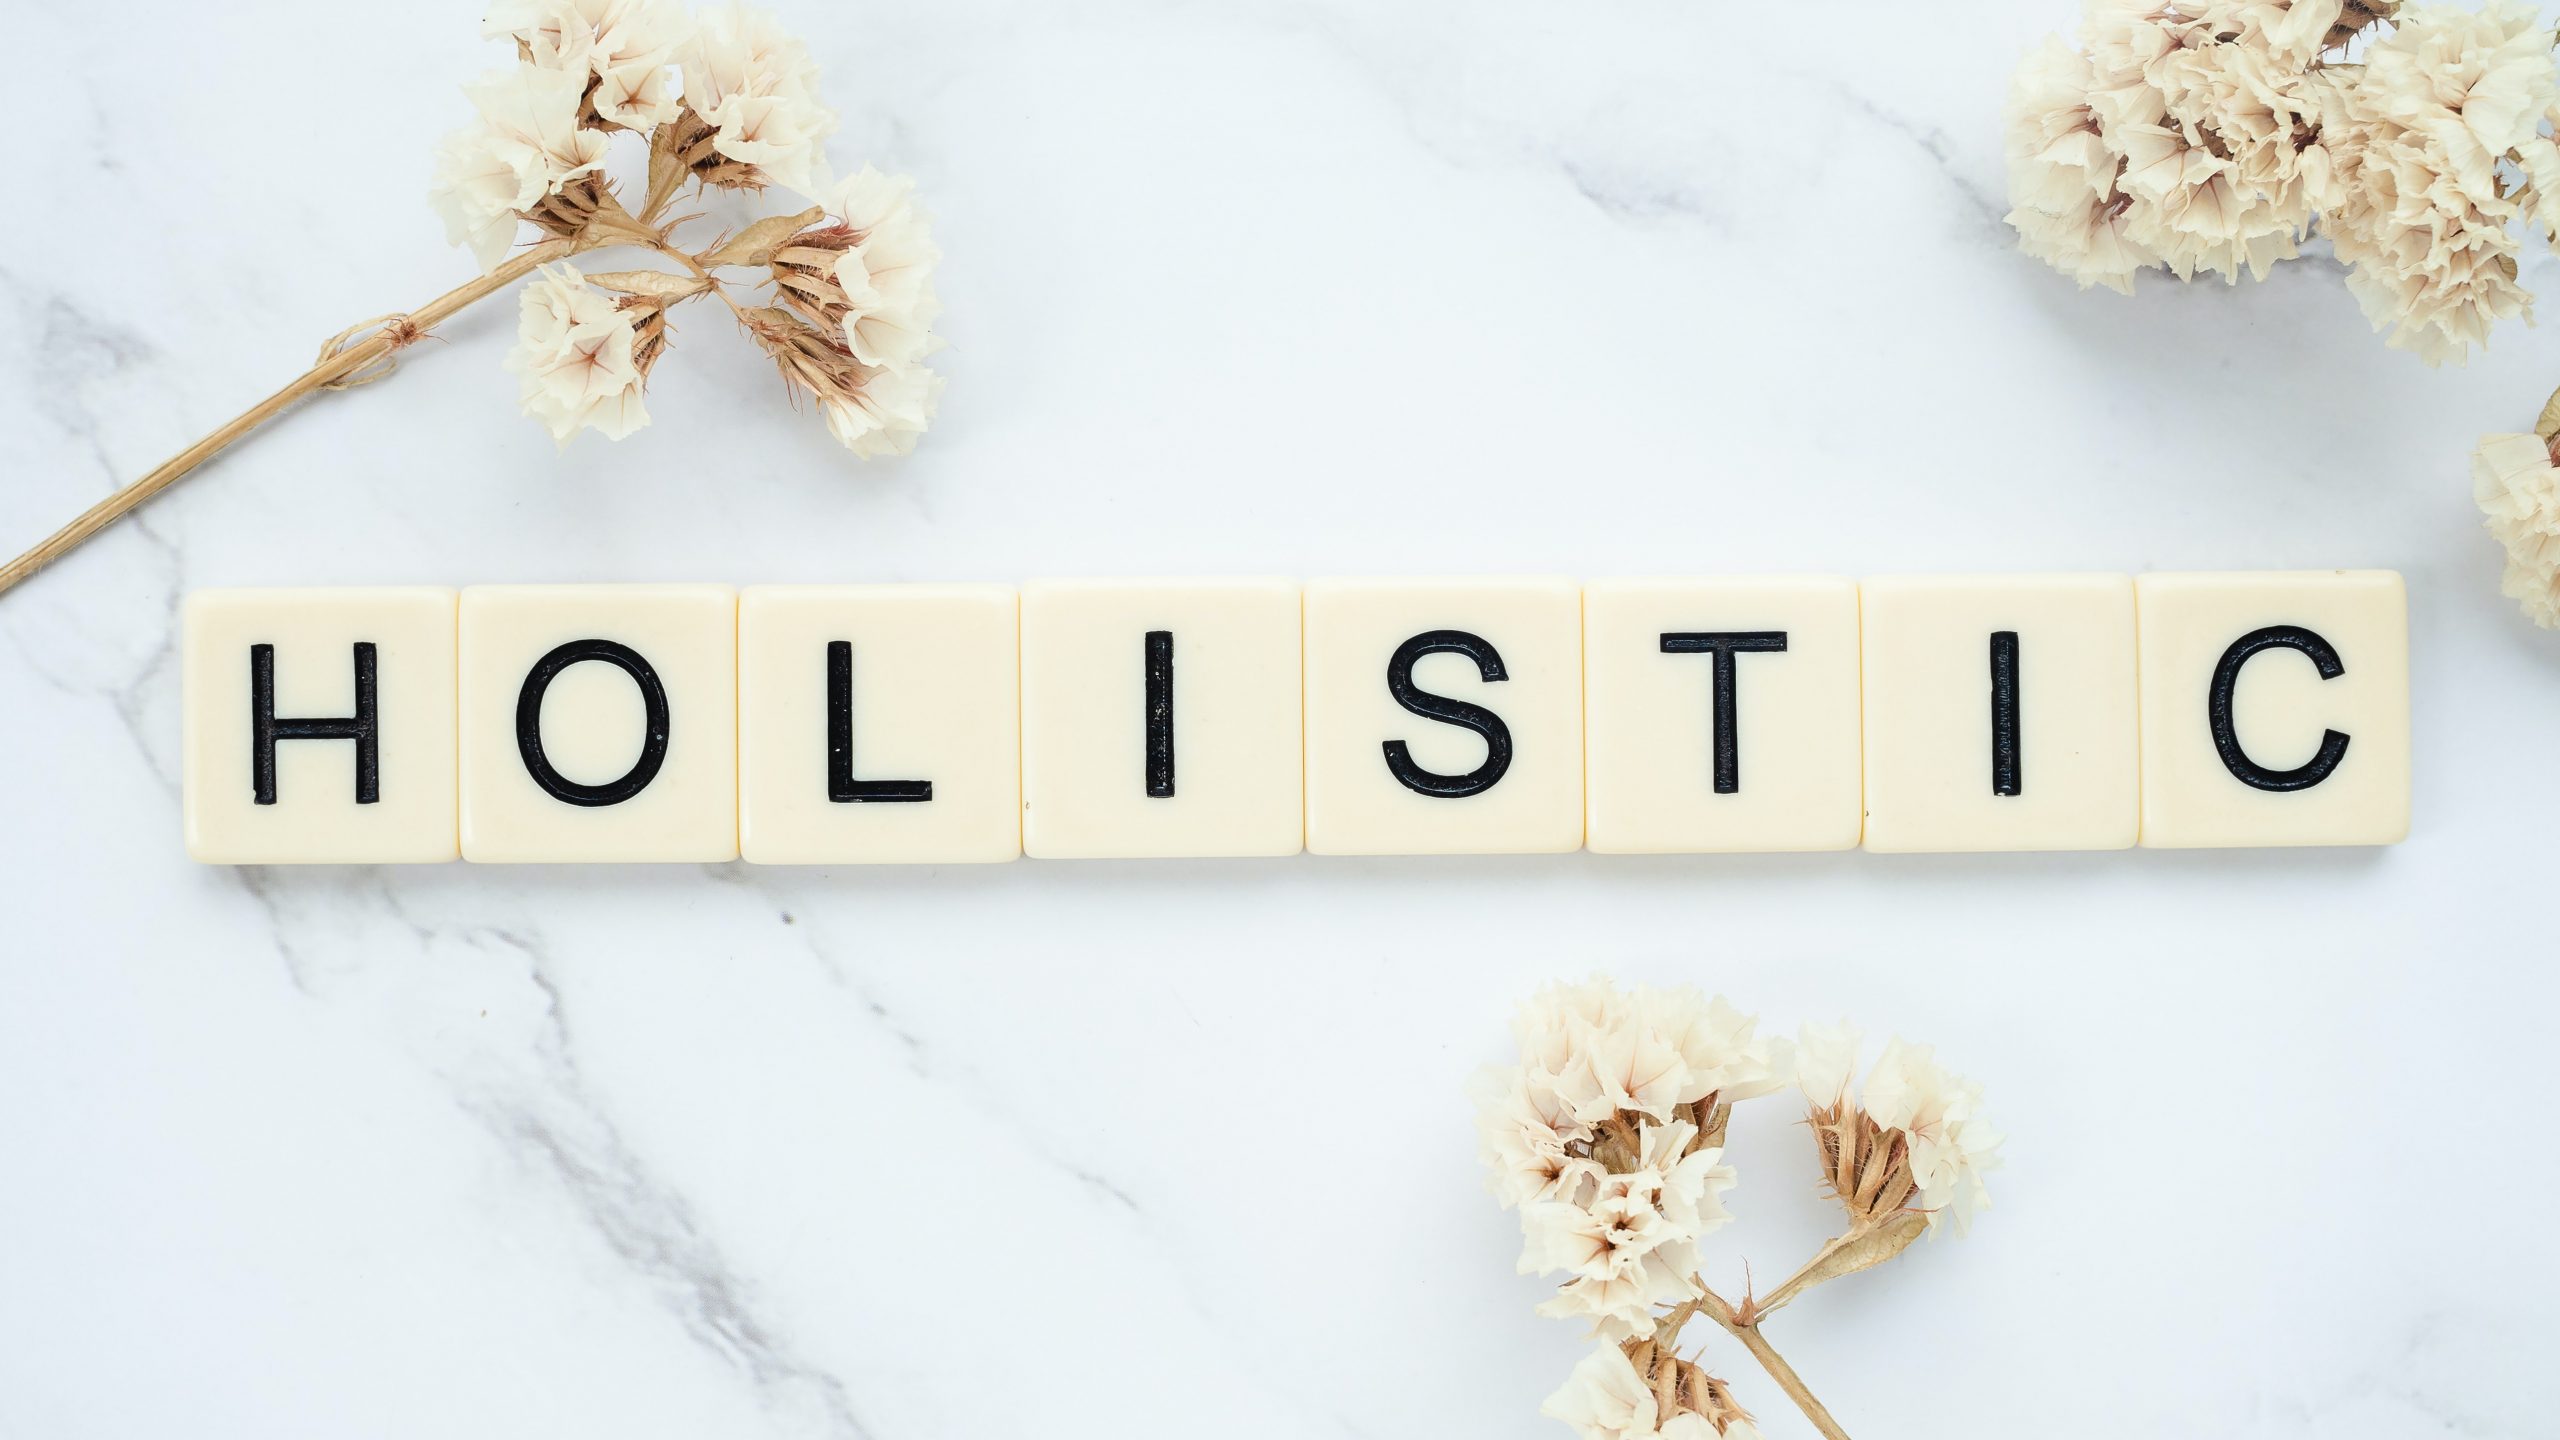 the work 'holistic' - pertaining in this post to holistic business